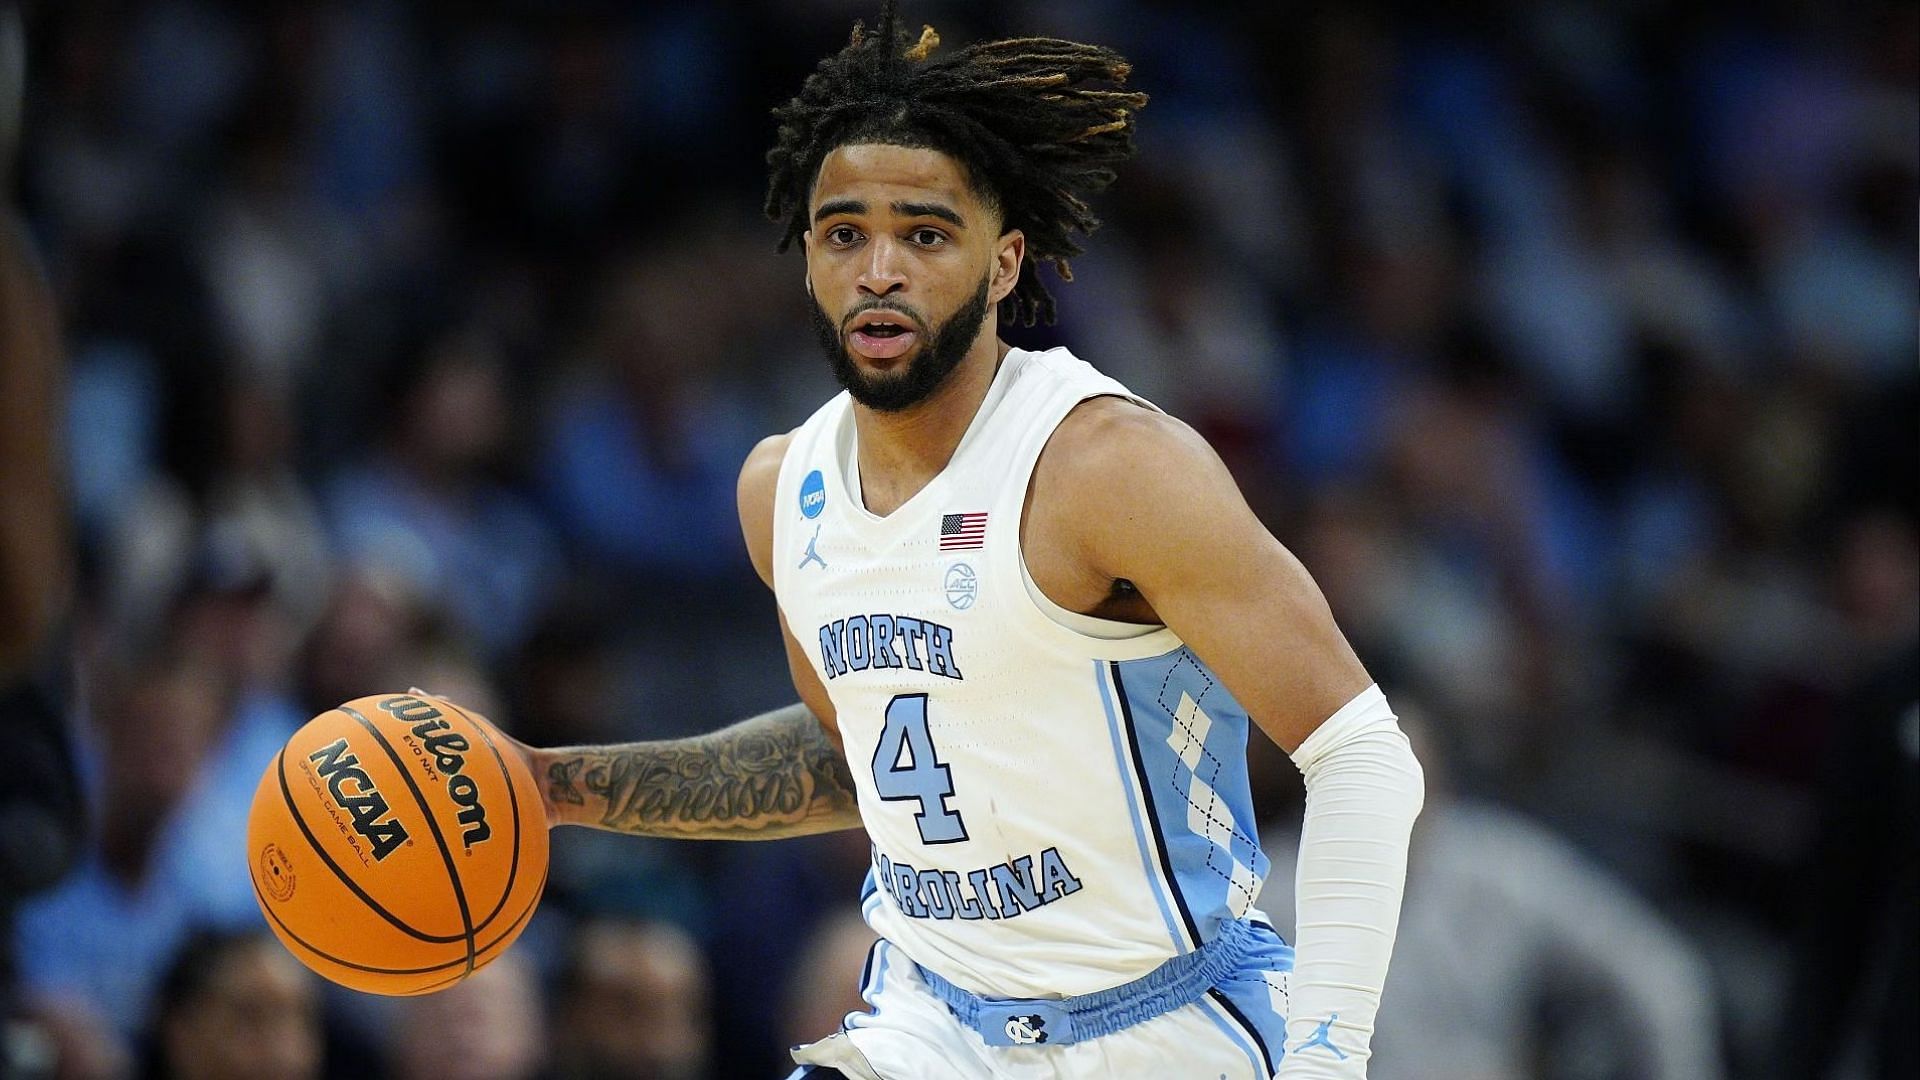 RJ Davis and UNC are looking to make a run in March Madness.